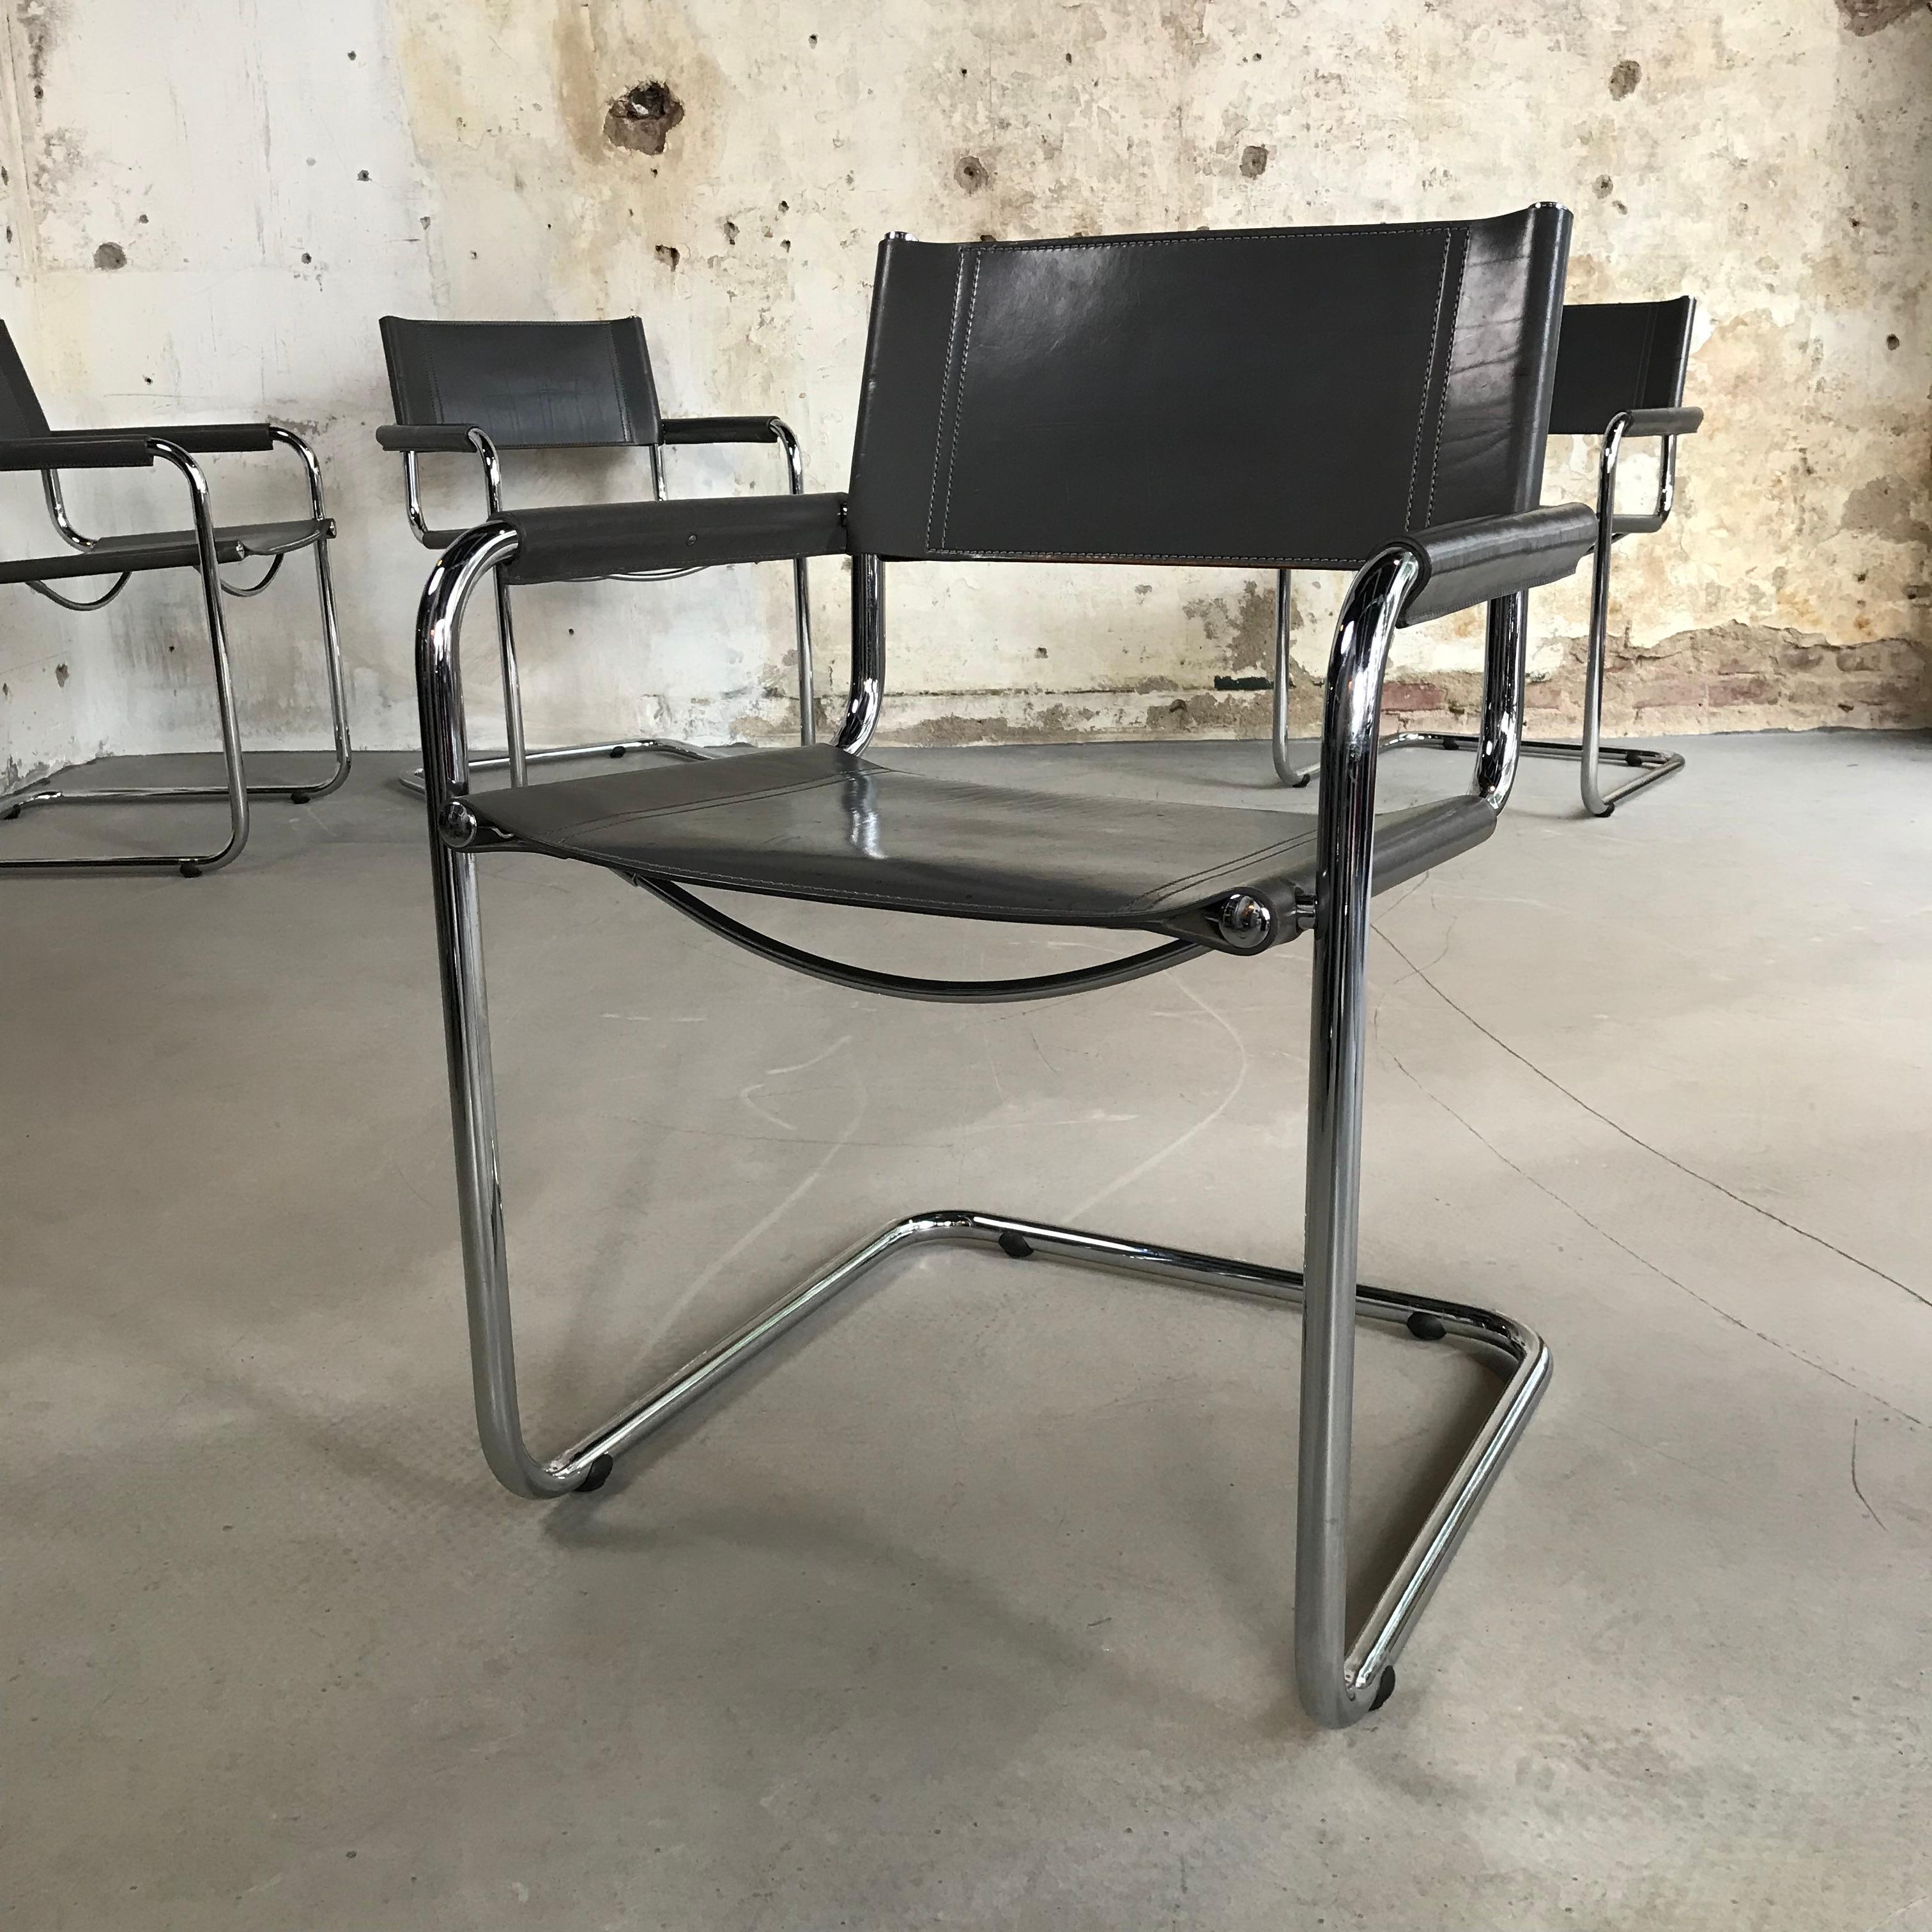 Italian Mid-Century Modern Leather and Chrome Cantilever Chairs by Mart Stam for Fasem  For Sale